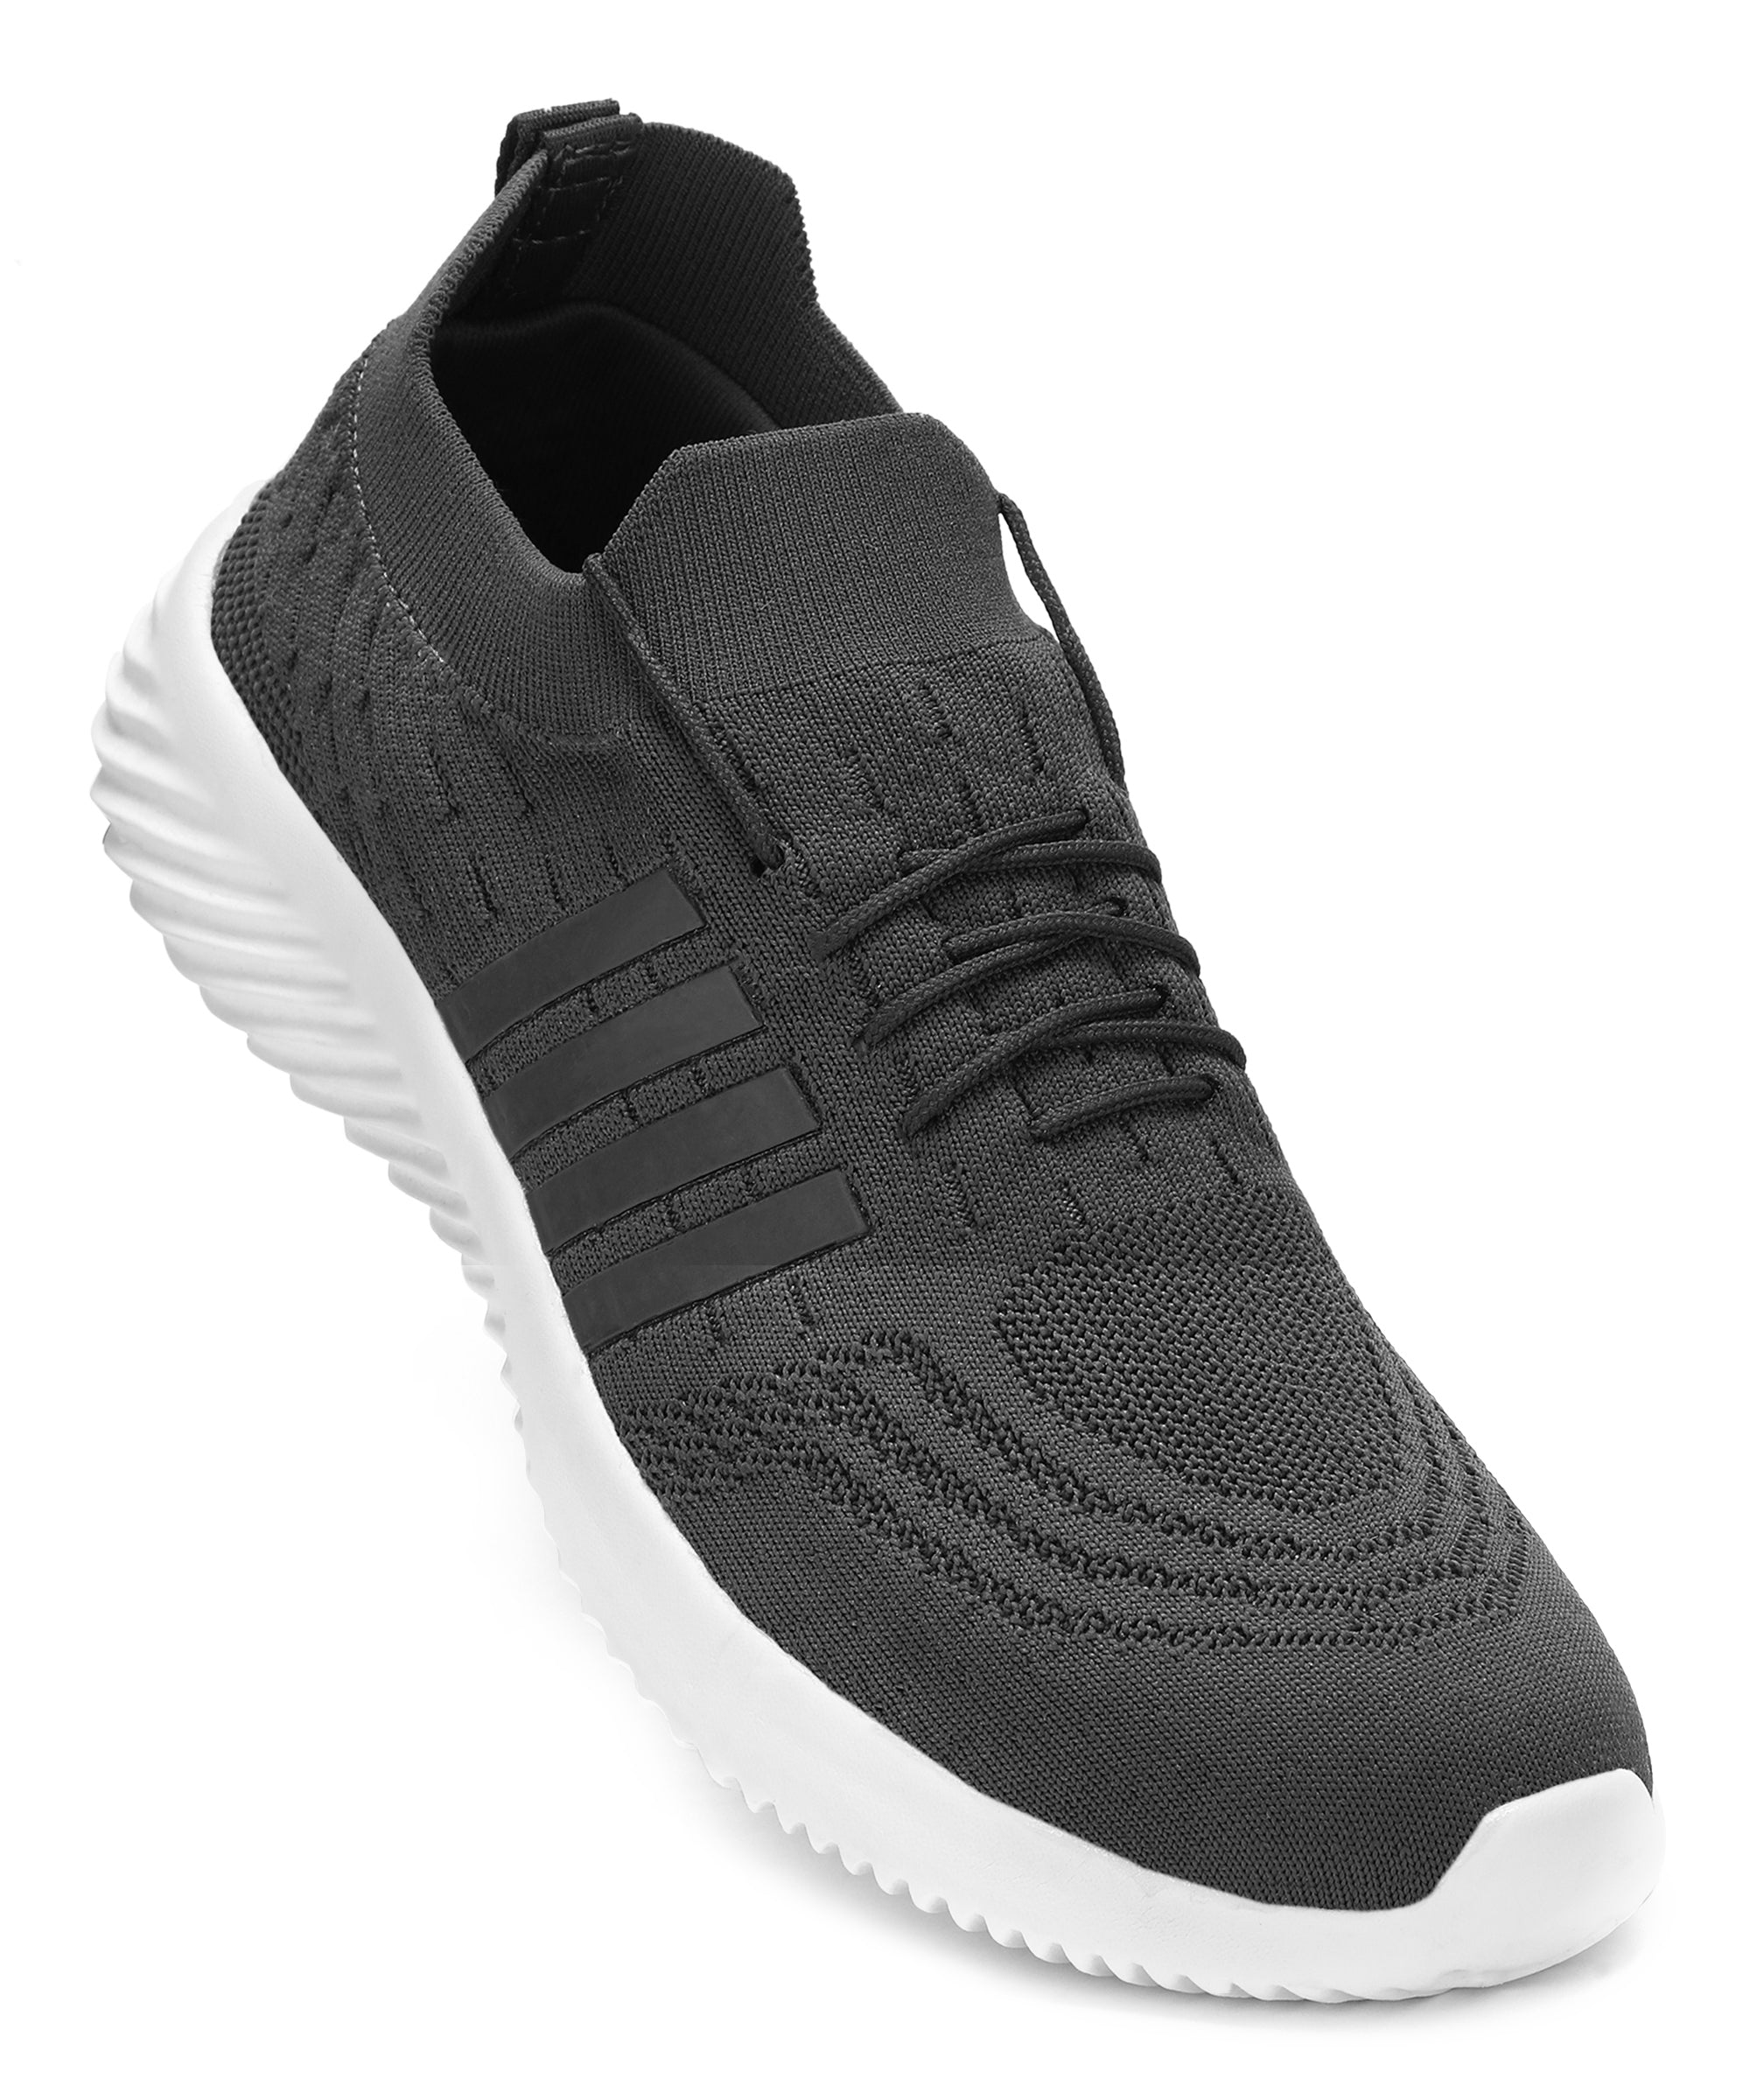 Paragon  K1213G Men Walking, Running, Training, Cricket, Gym, Sports Shoes | Athletic Shoes with Comfortable Cushioned Sole for Daily Outdoor Use